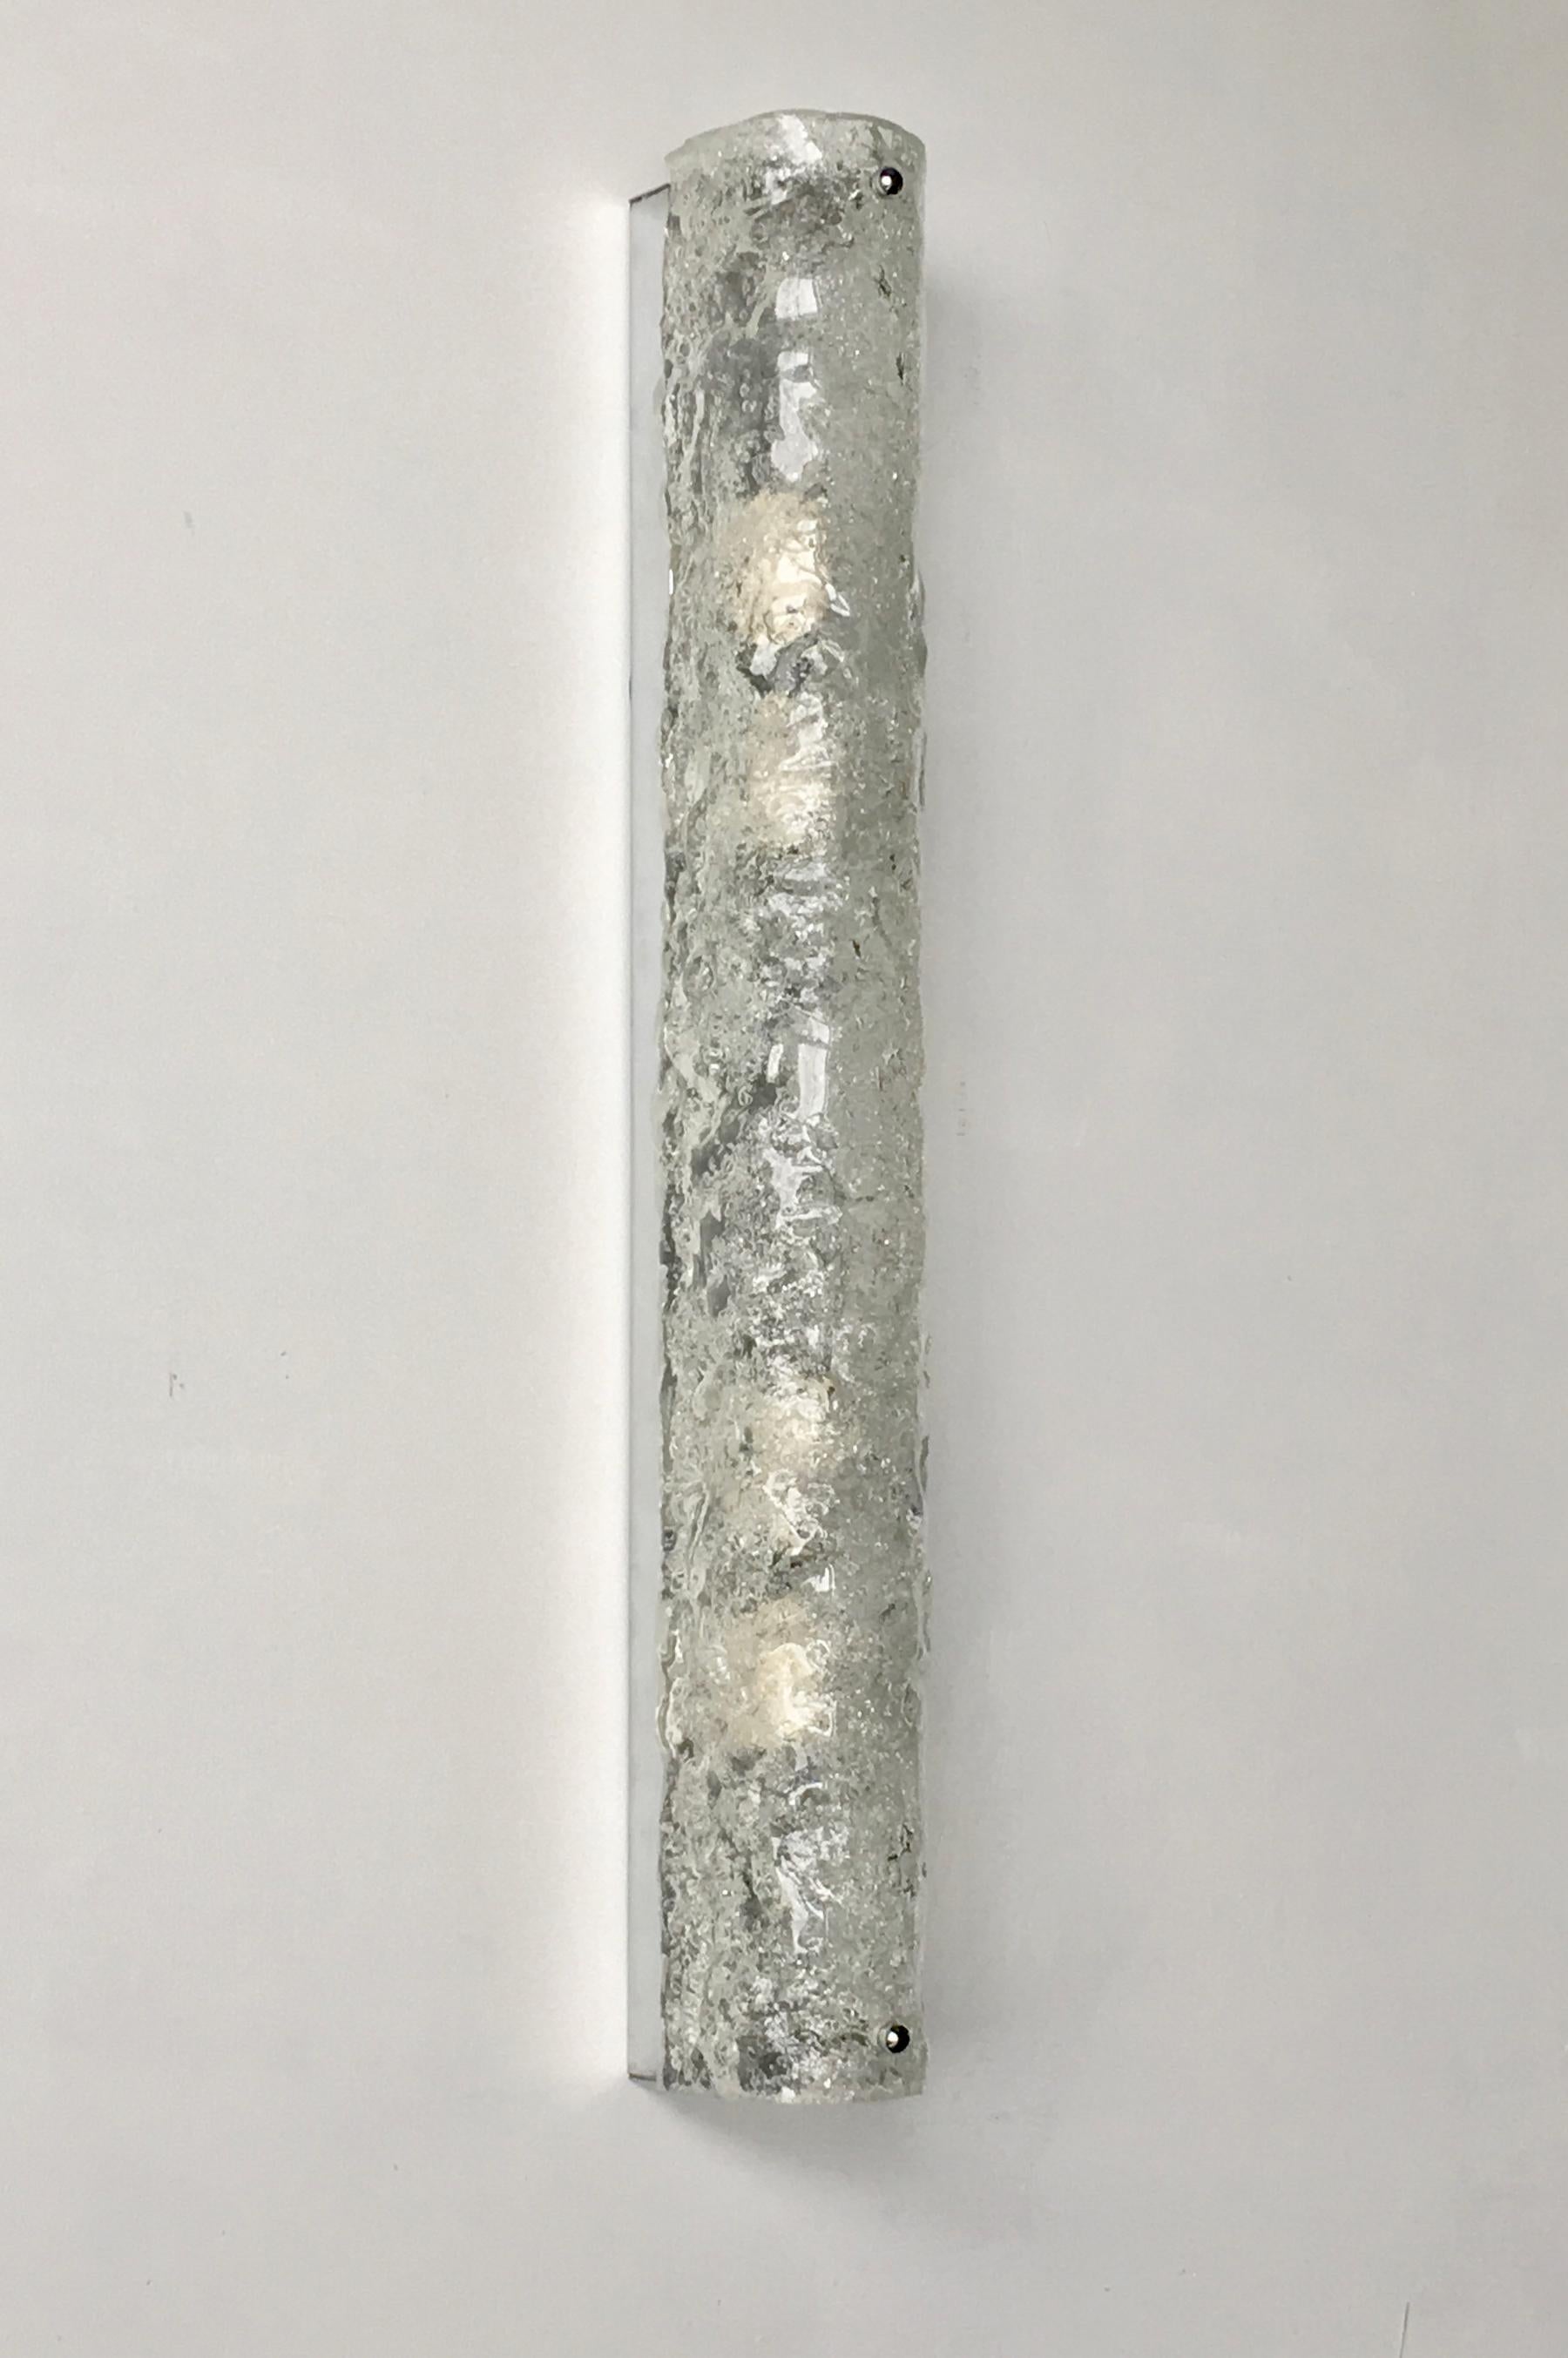 Long, slim ice glass sconce by Hillebrand, Germany, 1960s. 

Curved glass shade of bubbled and textured glass over chrome back plate; the glass is held in place by chrome screws. The piece is in good original condition with minor signs of wear in